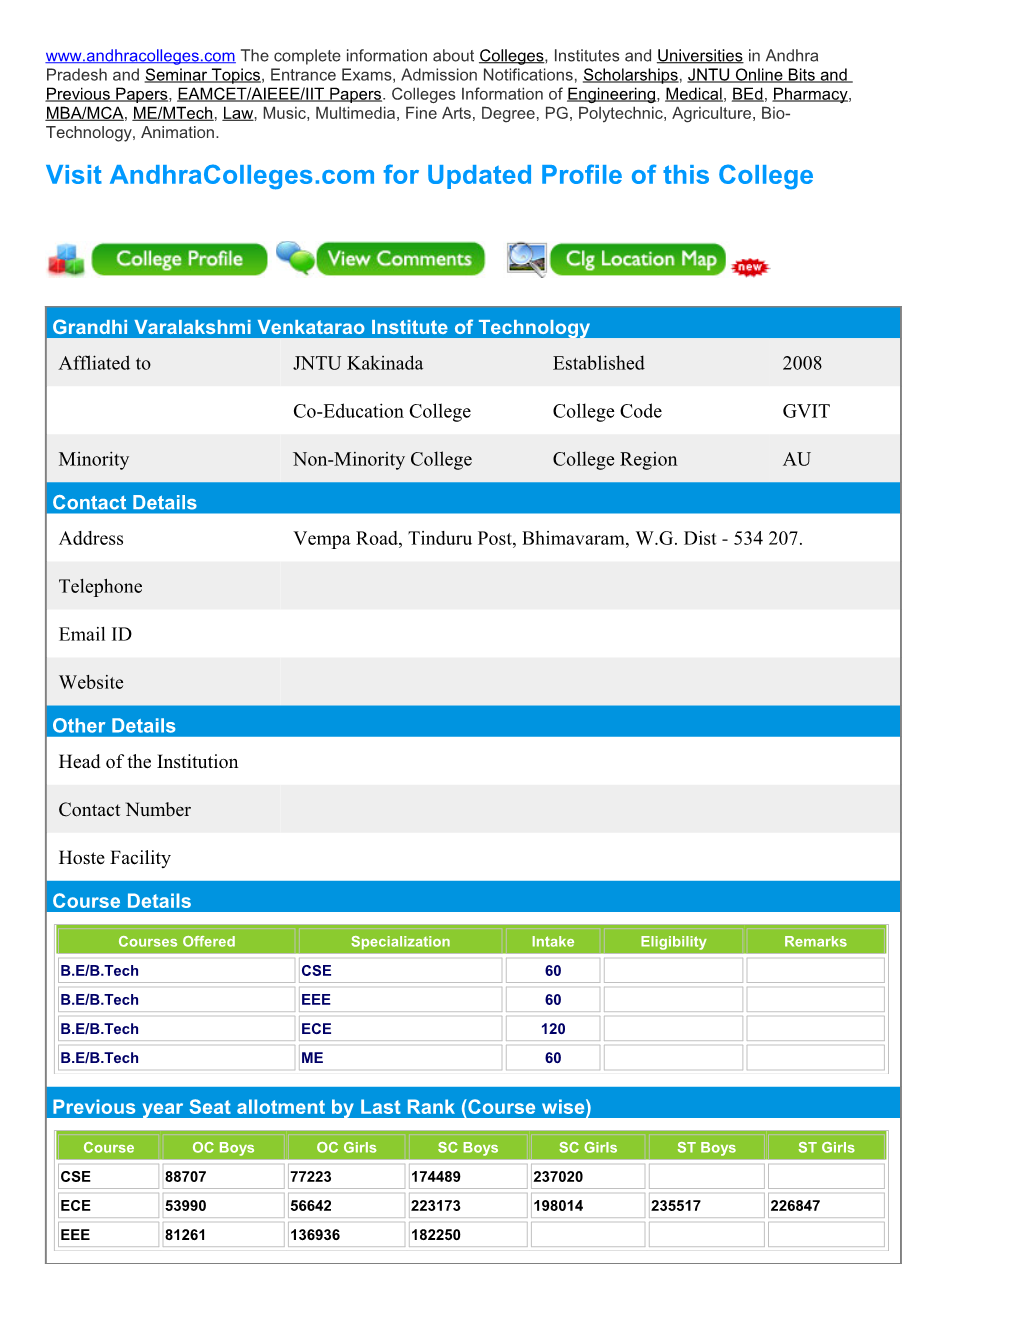 The Complete Information Aboutcolleges, Institutes Anduniversitiesin Andhra Pradesh Andseminar